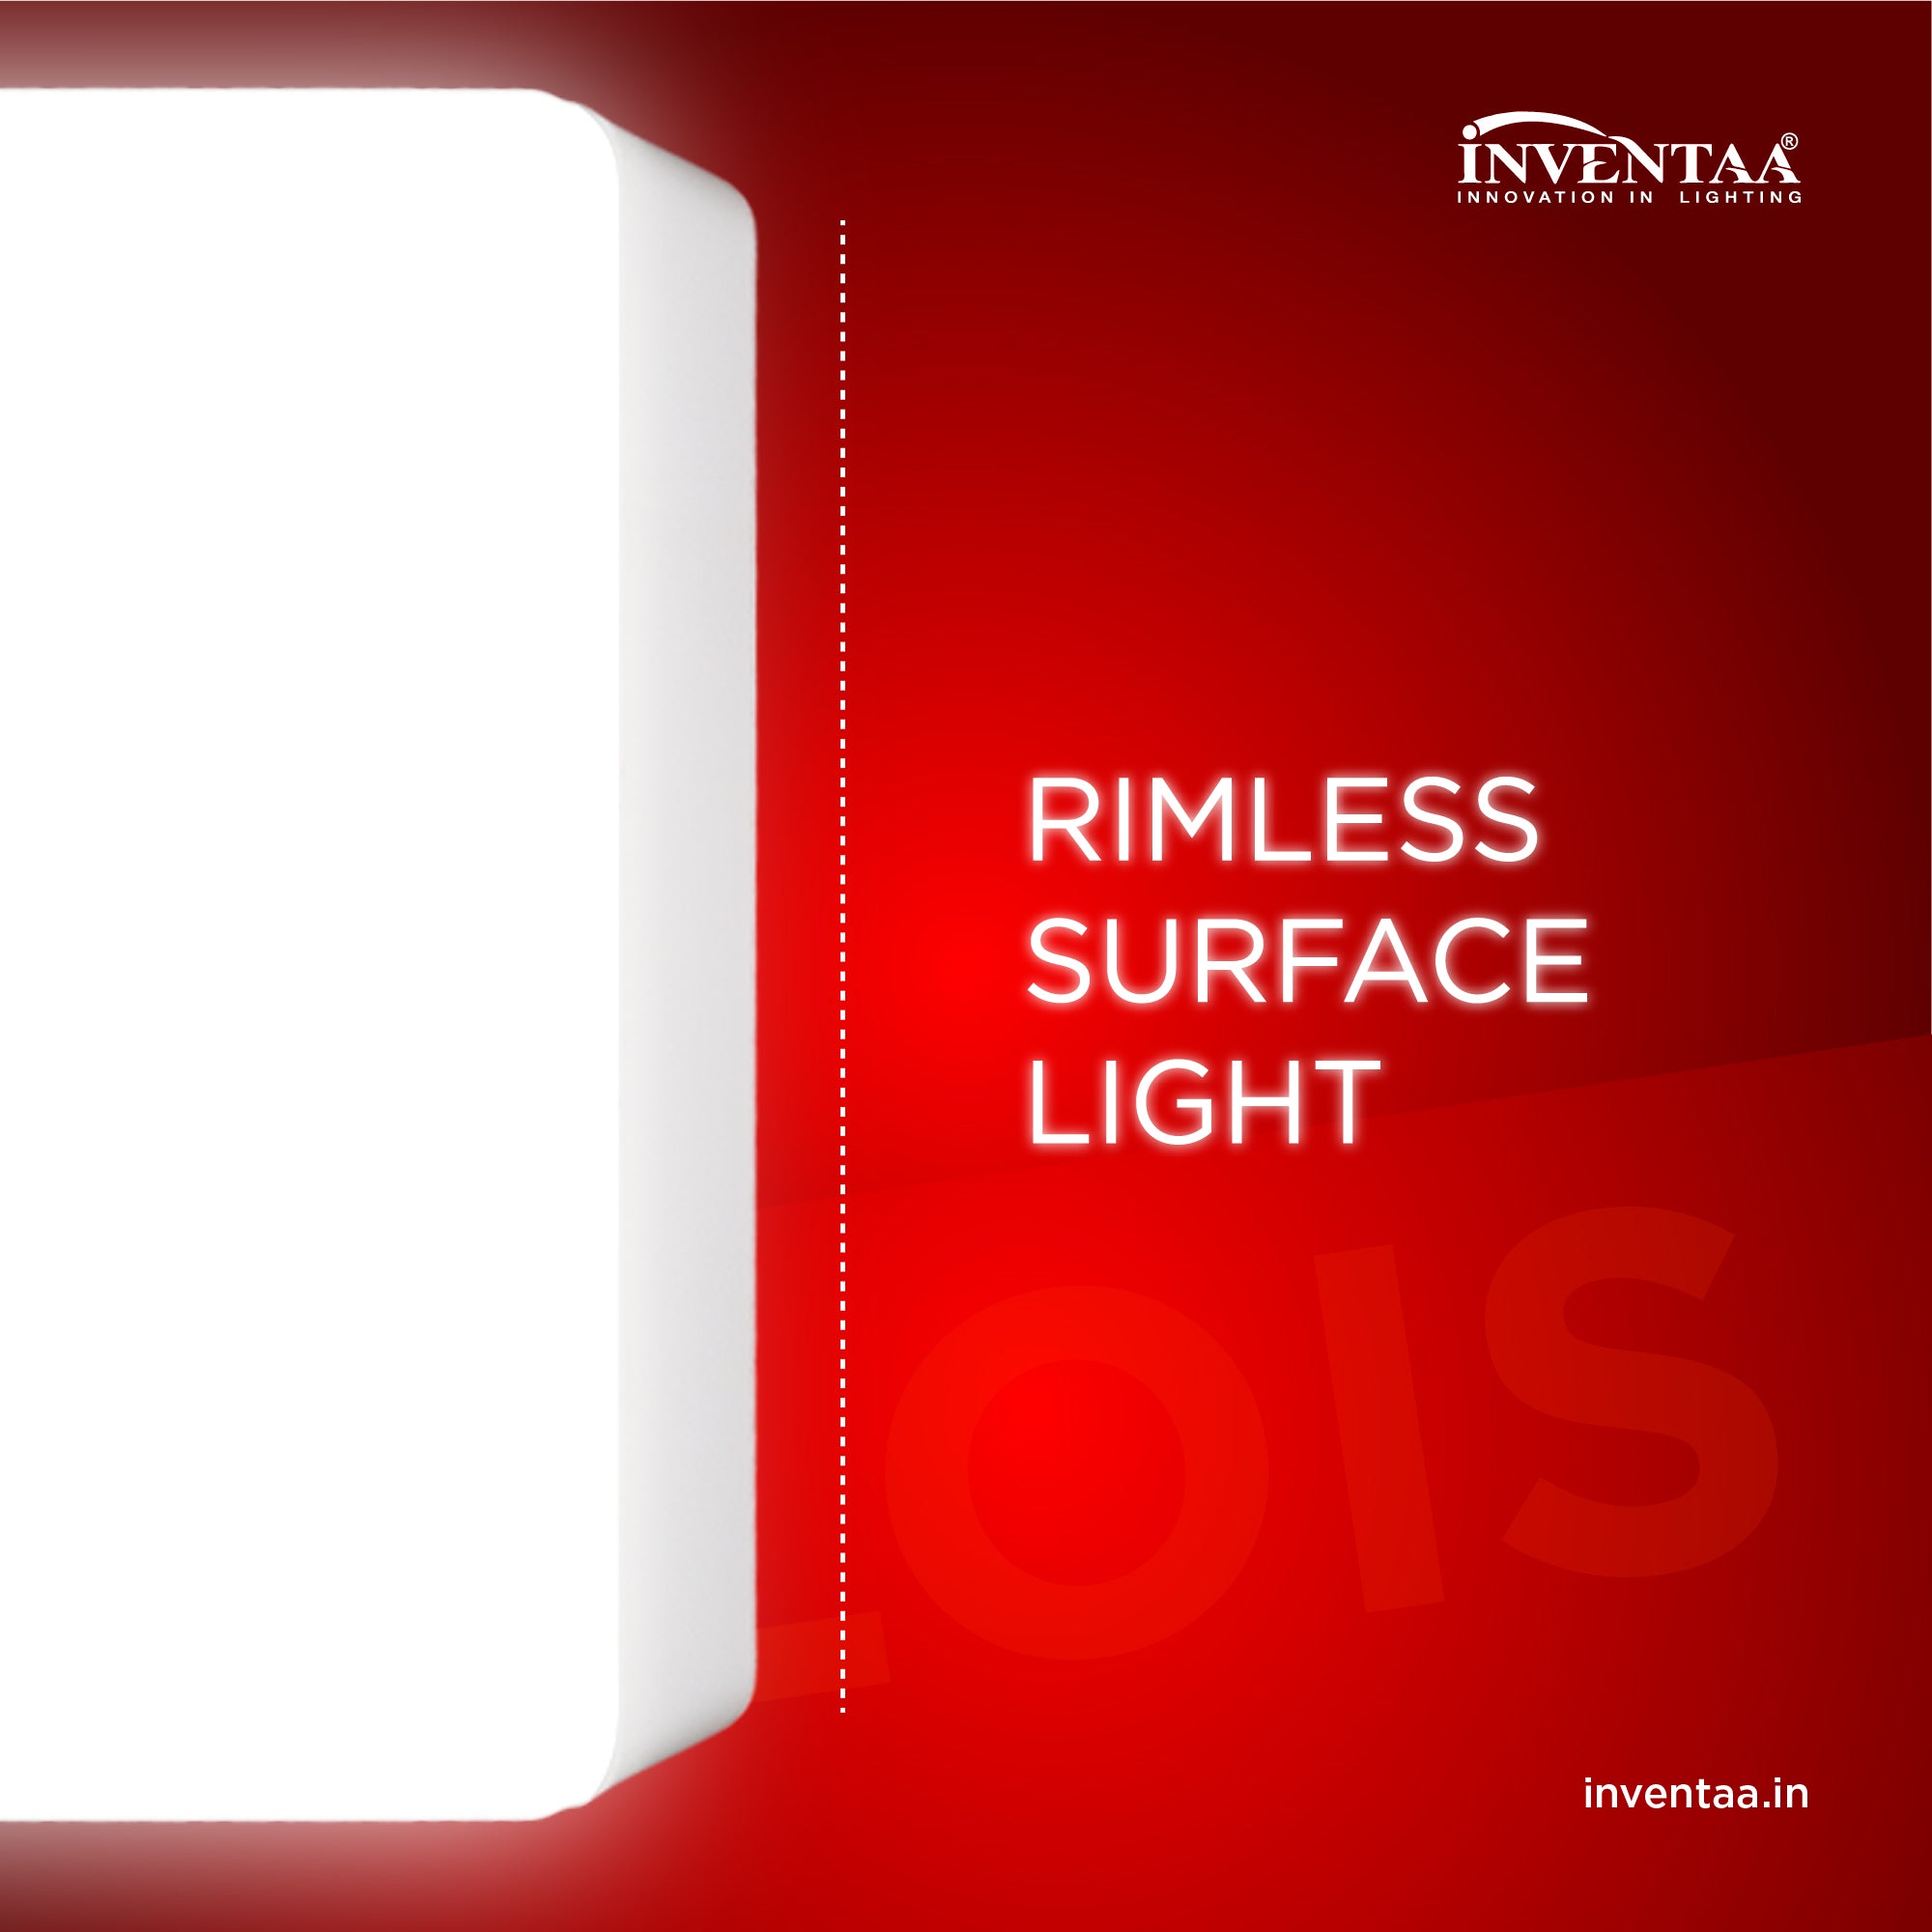  Lois Square 22W LED Surface Light Featuring Its Rimless Design #watts_22w